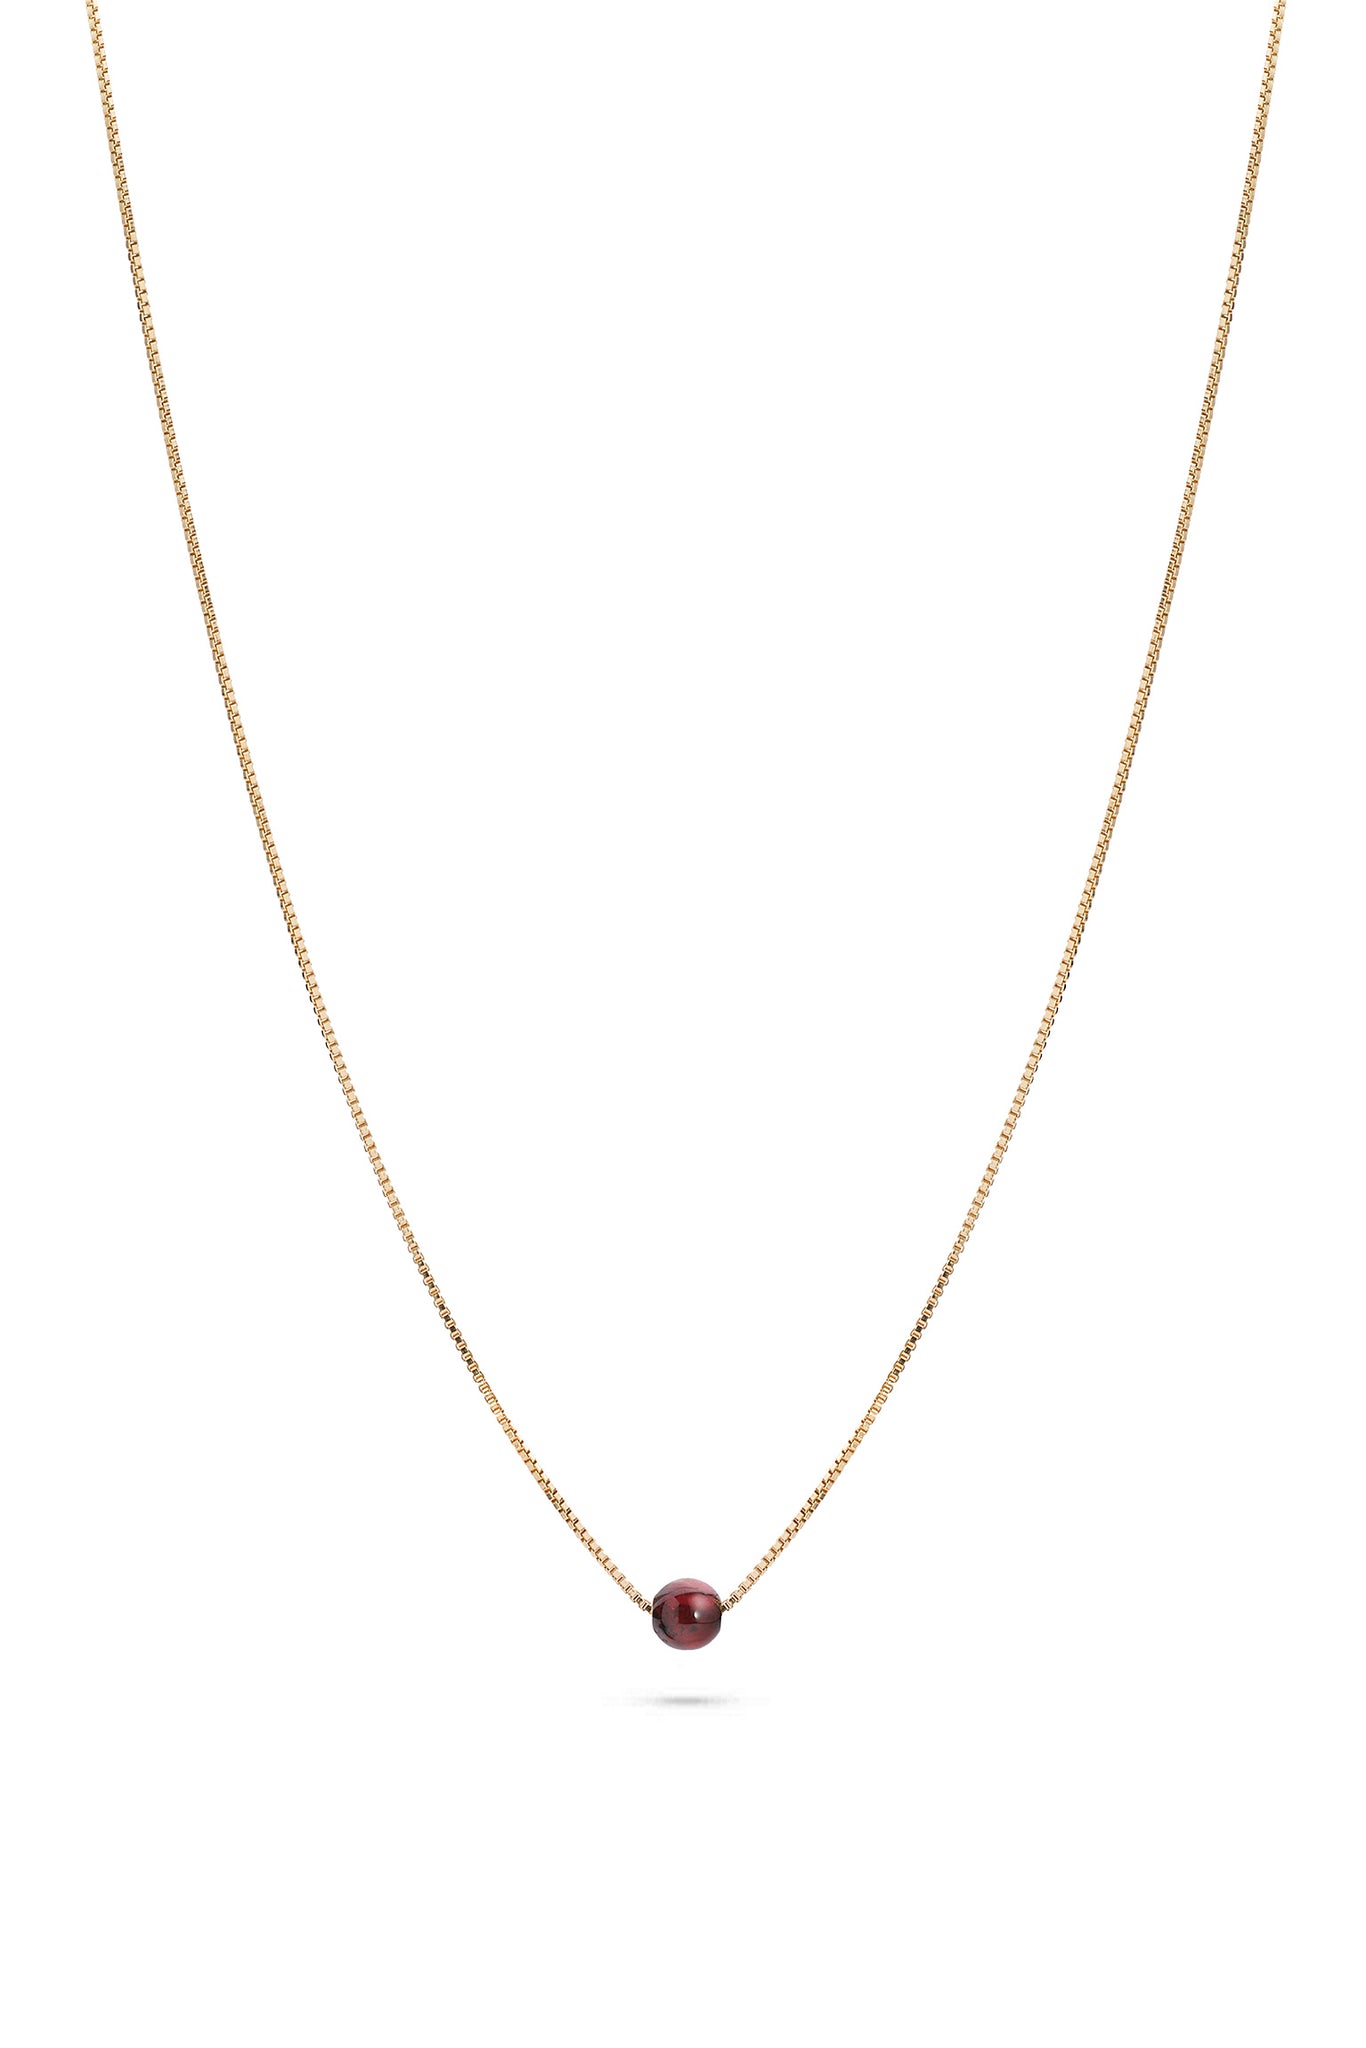 Birthstone Necklace Gold January